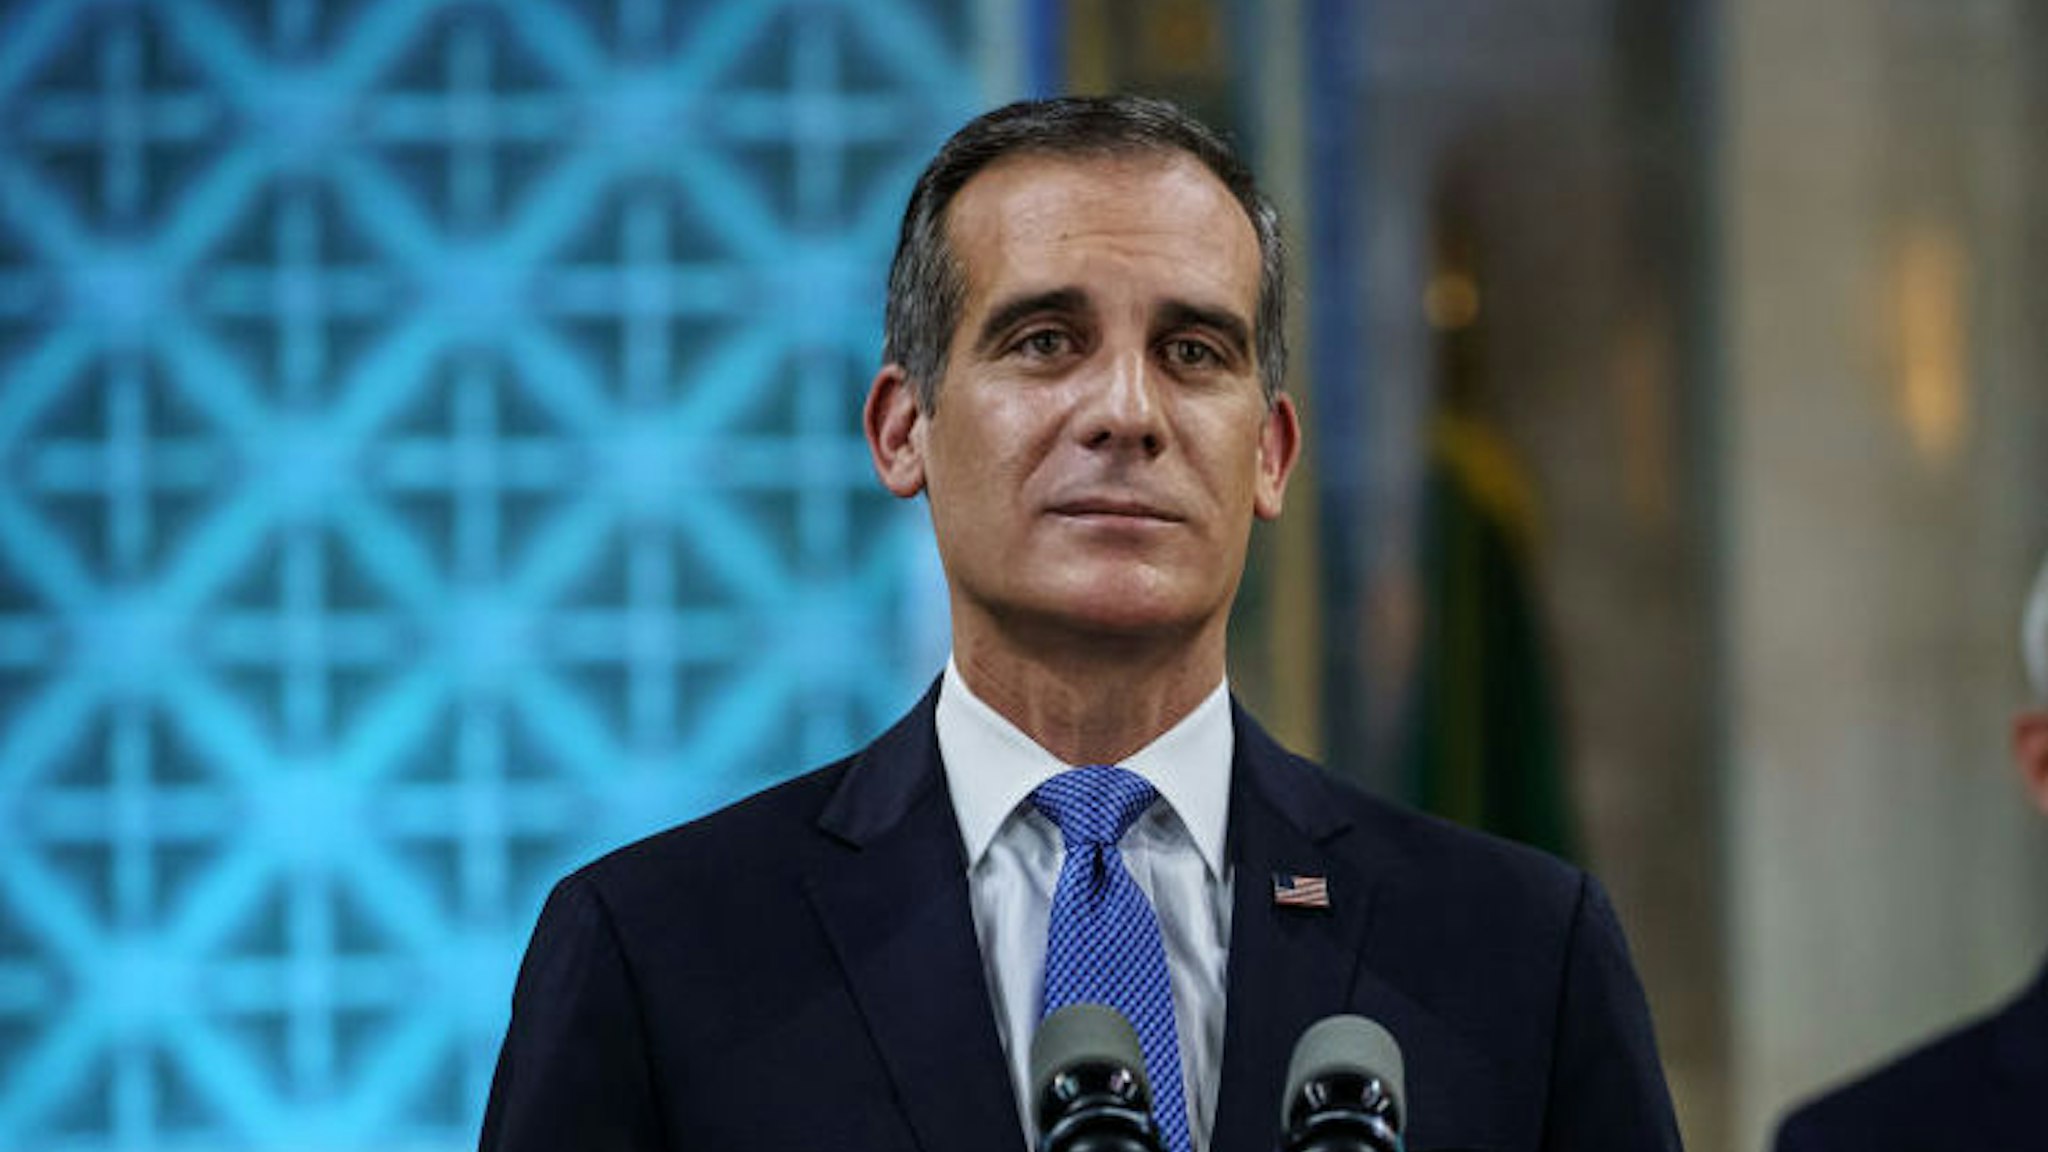 LOS ANGELES, CALIF. -- SUNDAY, APRIL 19, 2020: Los Angeles Mayor Eric Garcetti tears up as he gives his annual 'State of the City' speech at City Hall in Los Angeles, Calif., on April 19, 2020.